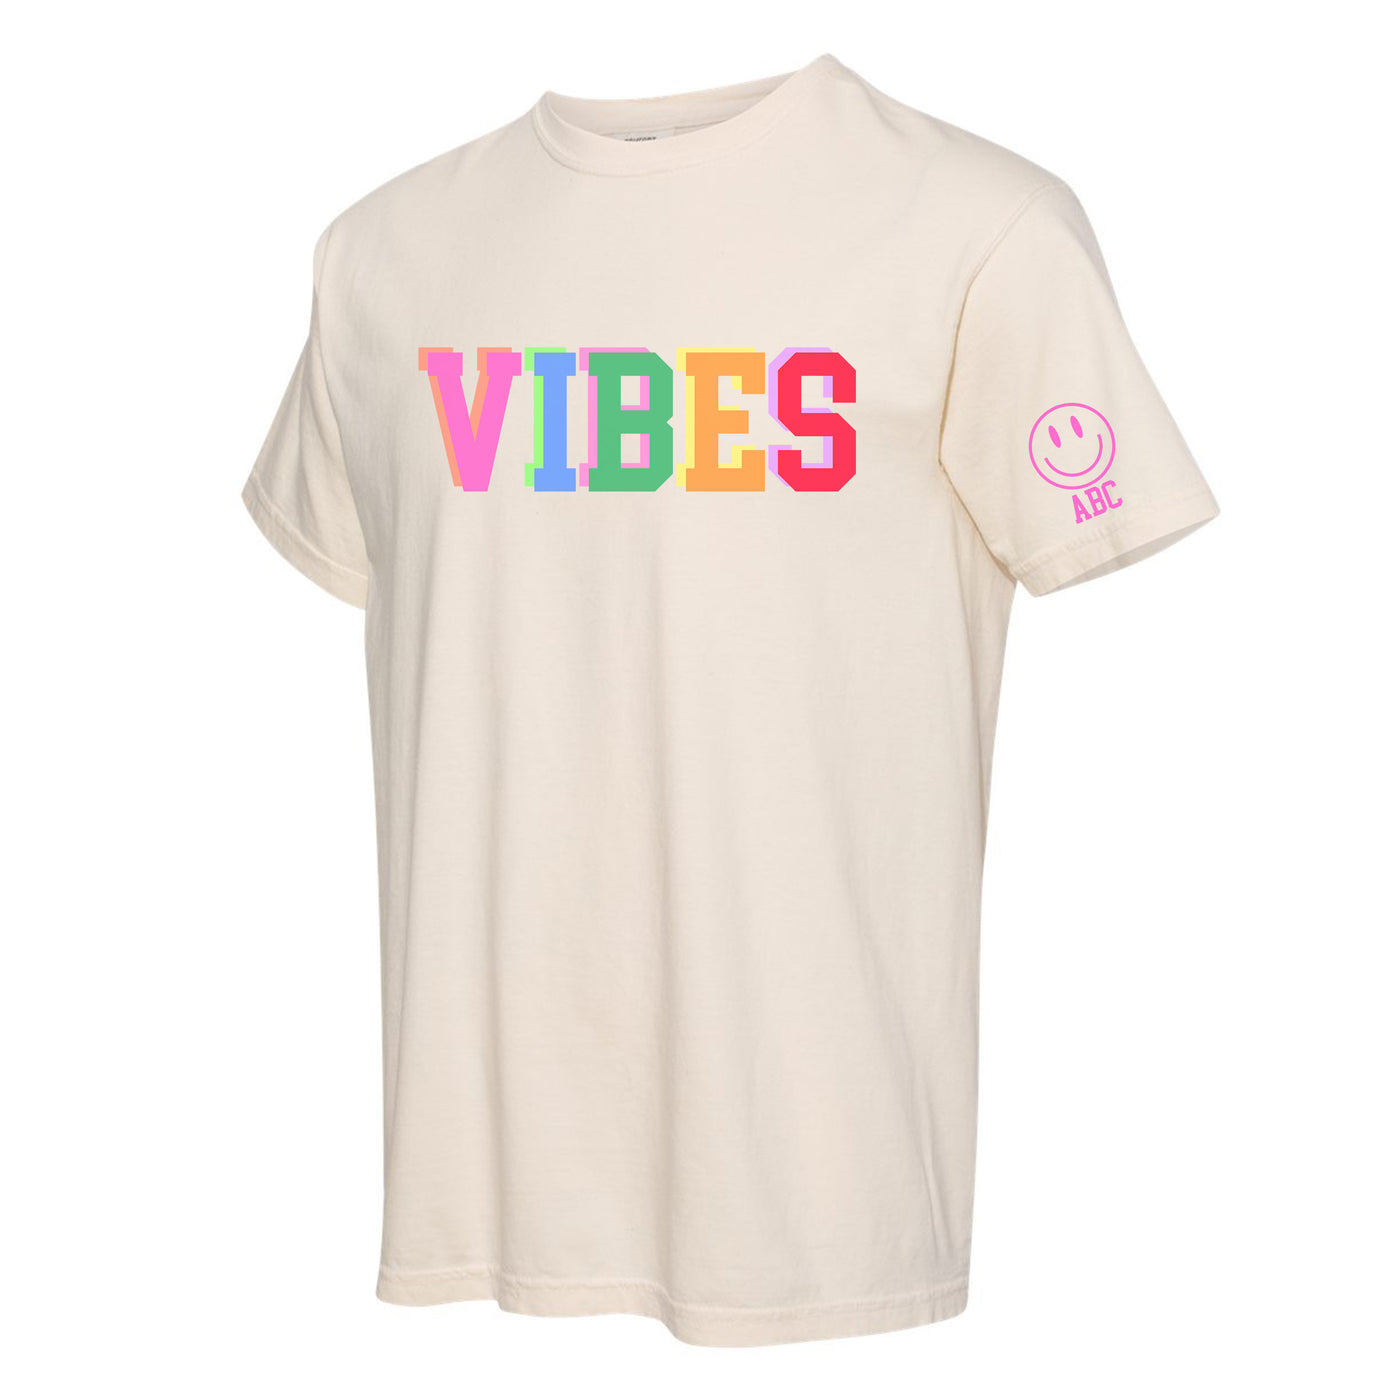 Initialed Colorful Block 'Vibes' Tee